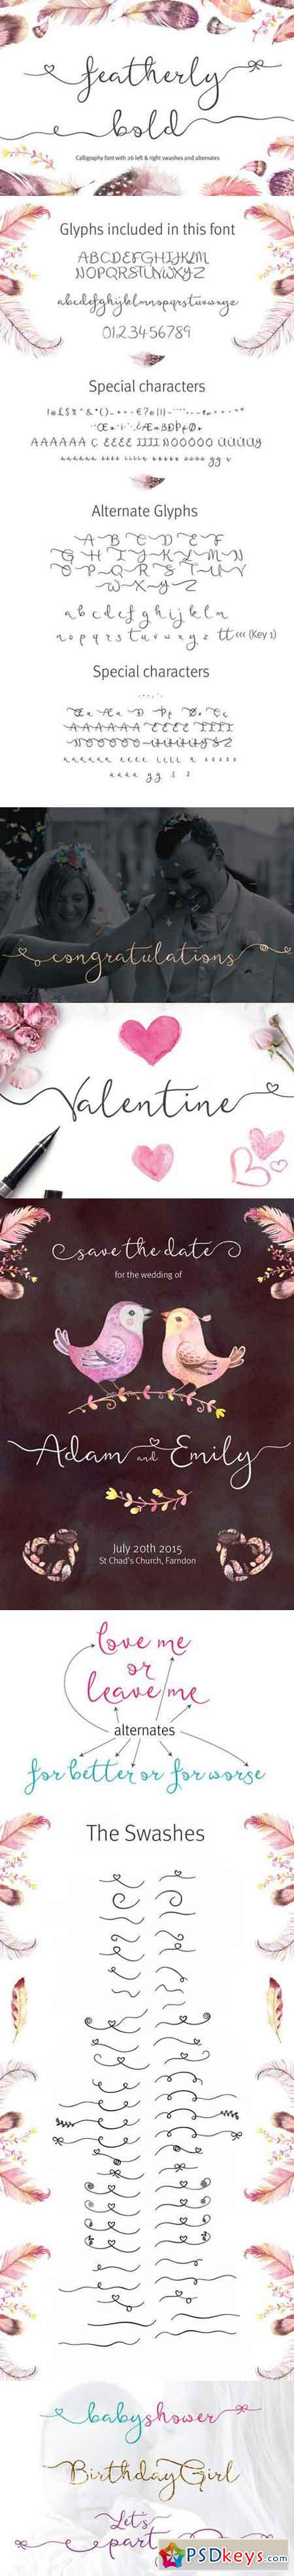 featherly font wedding font 287170 Updated!